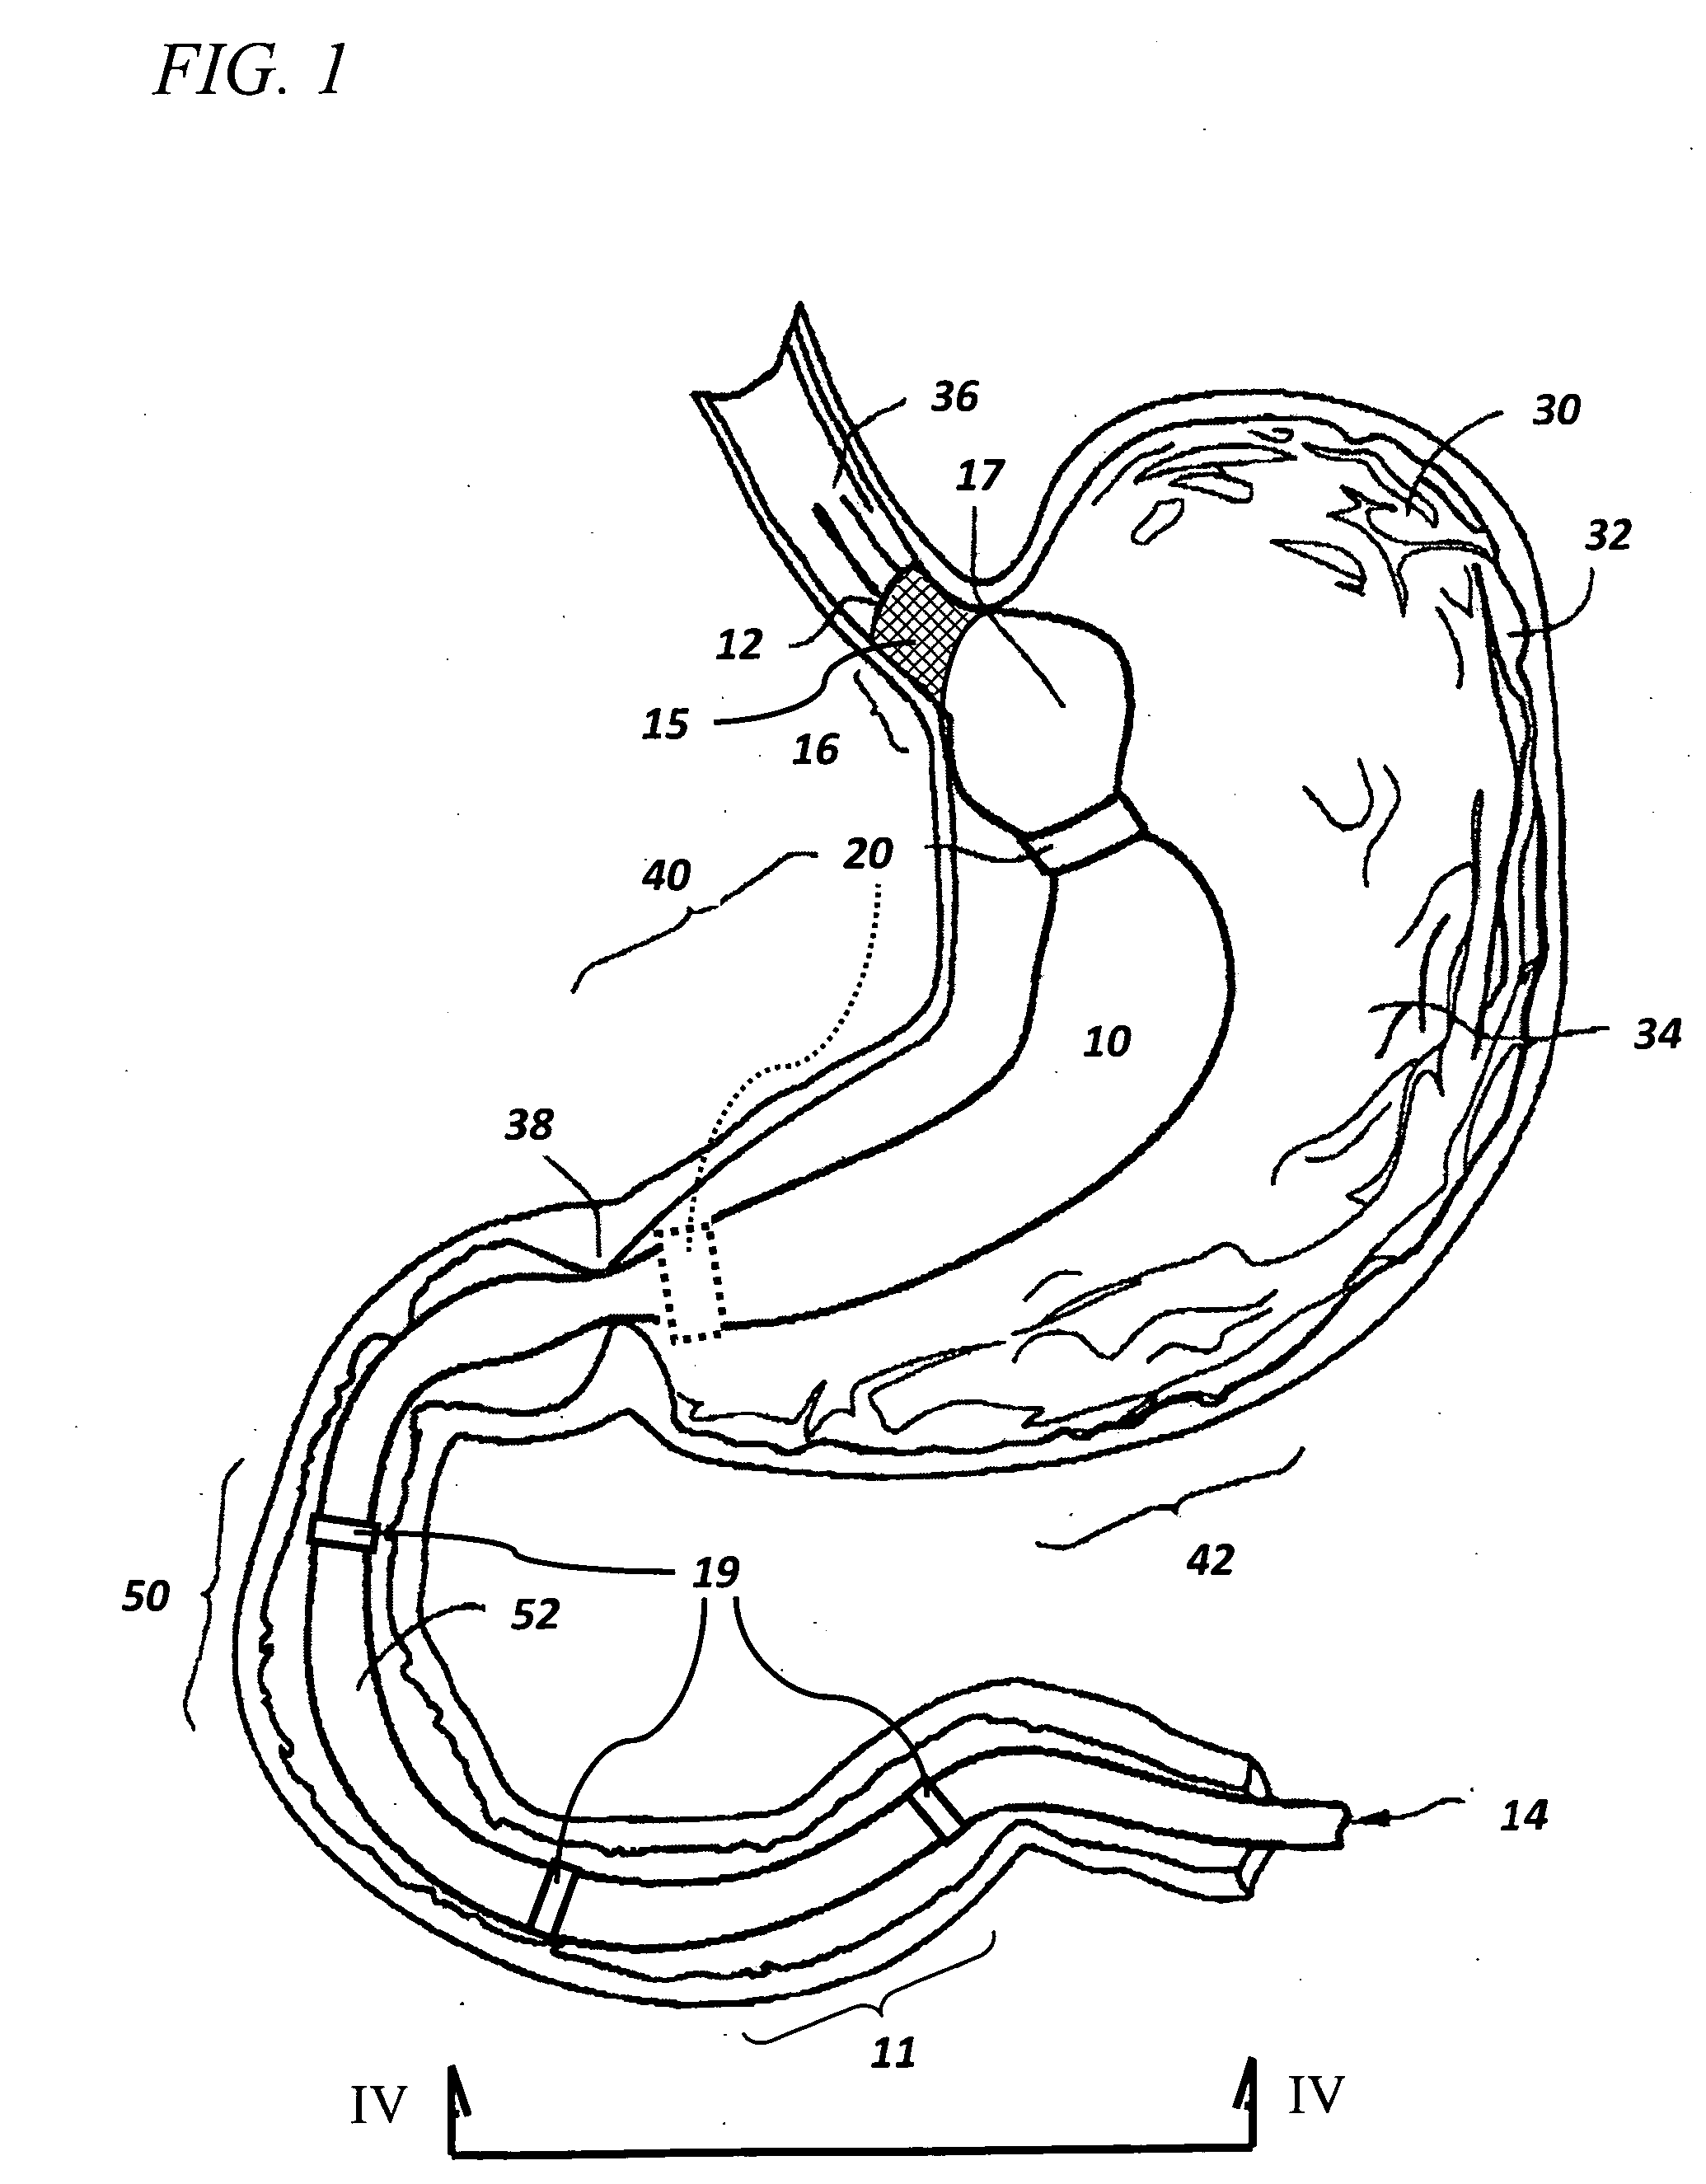 Devices and methods for augmenting extragastric banding